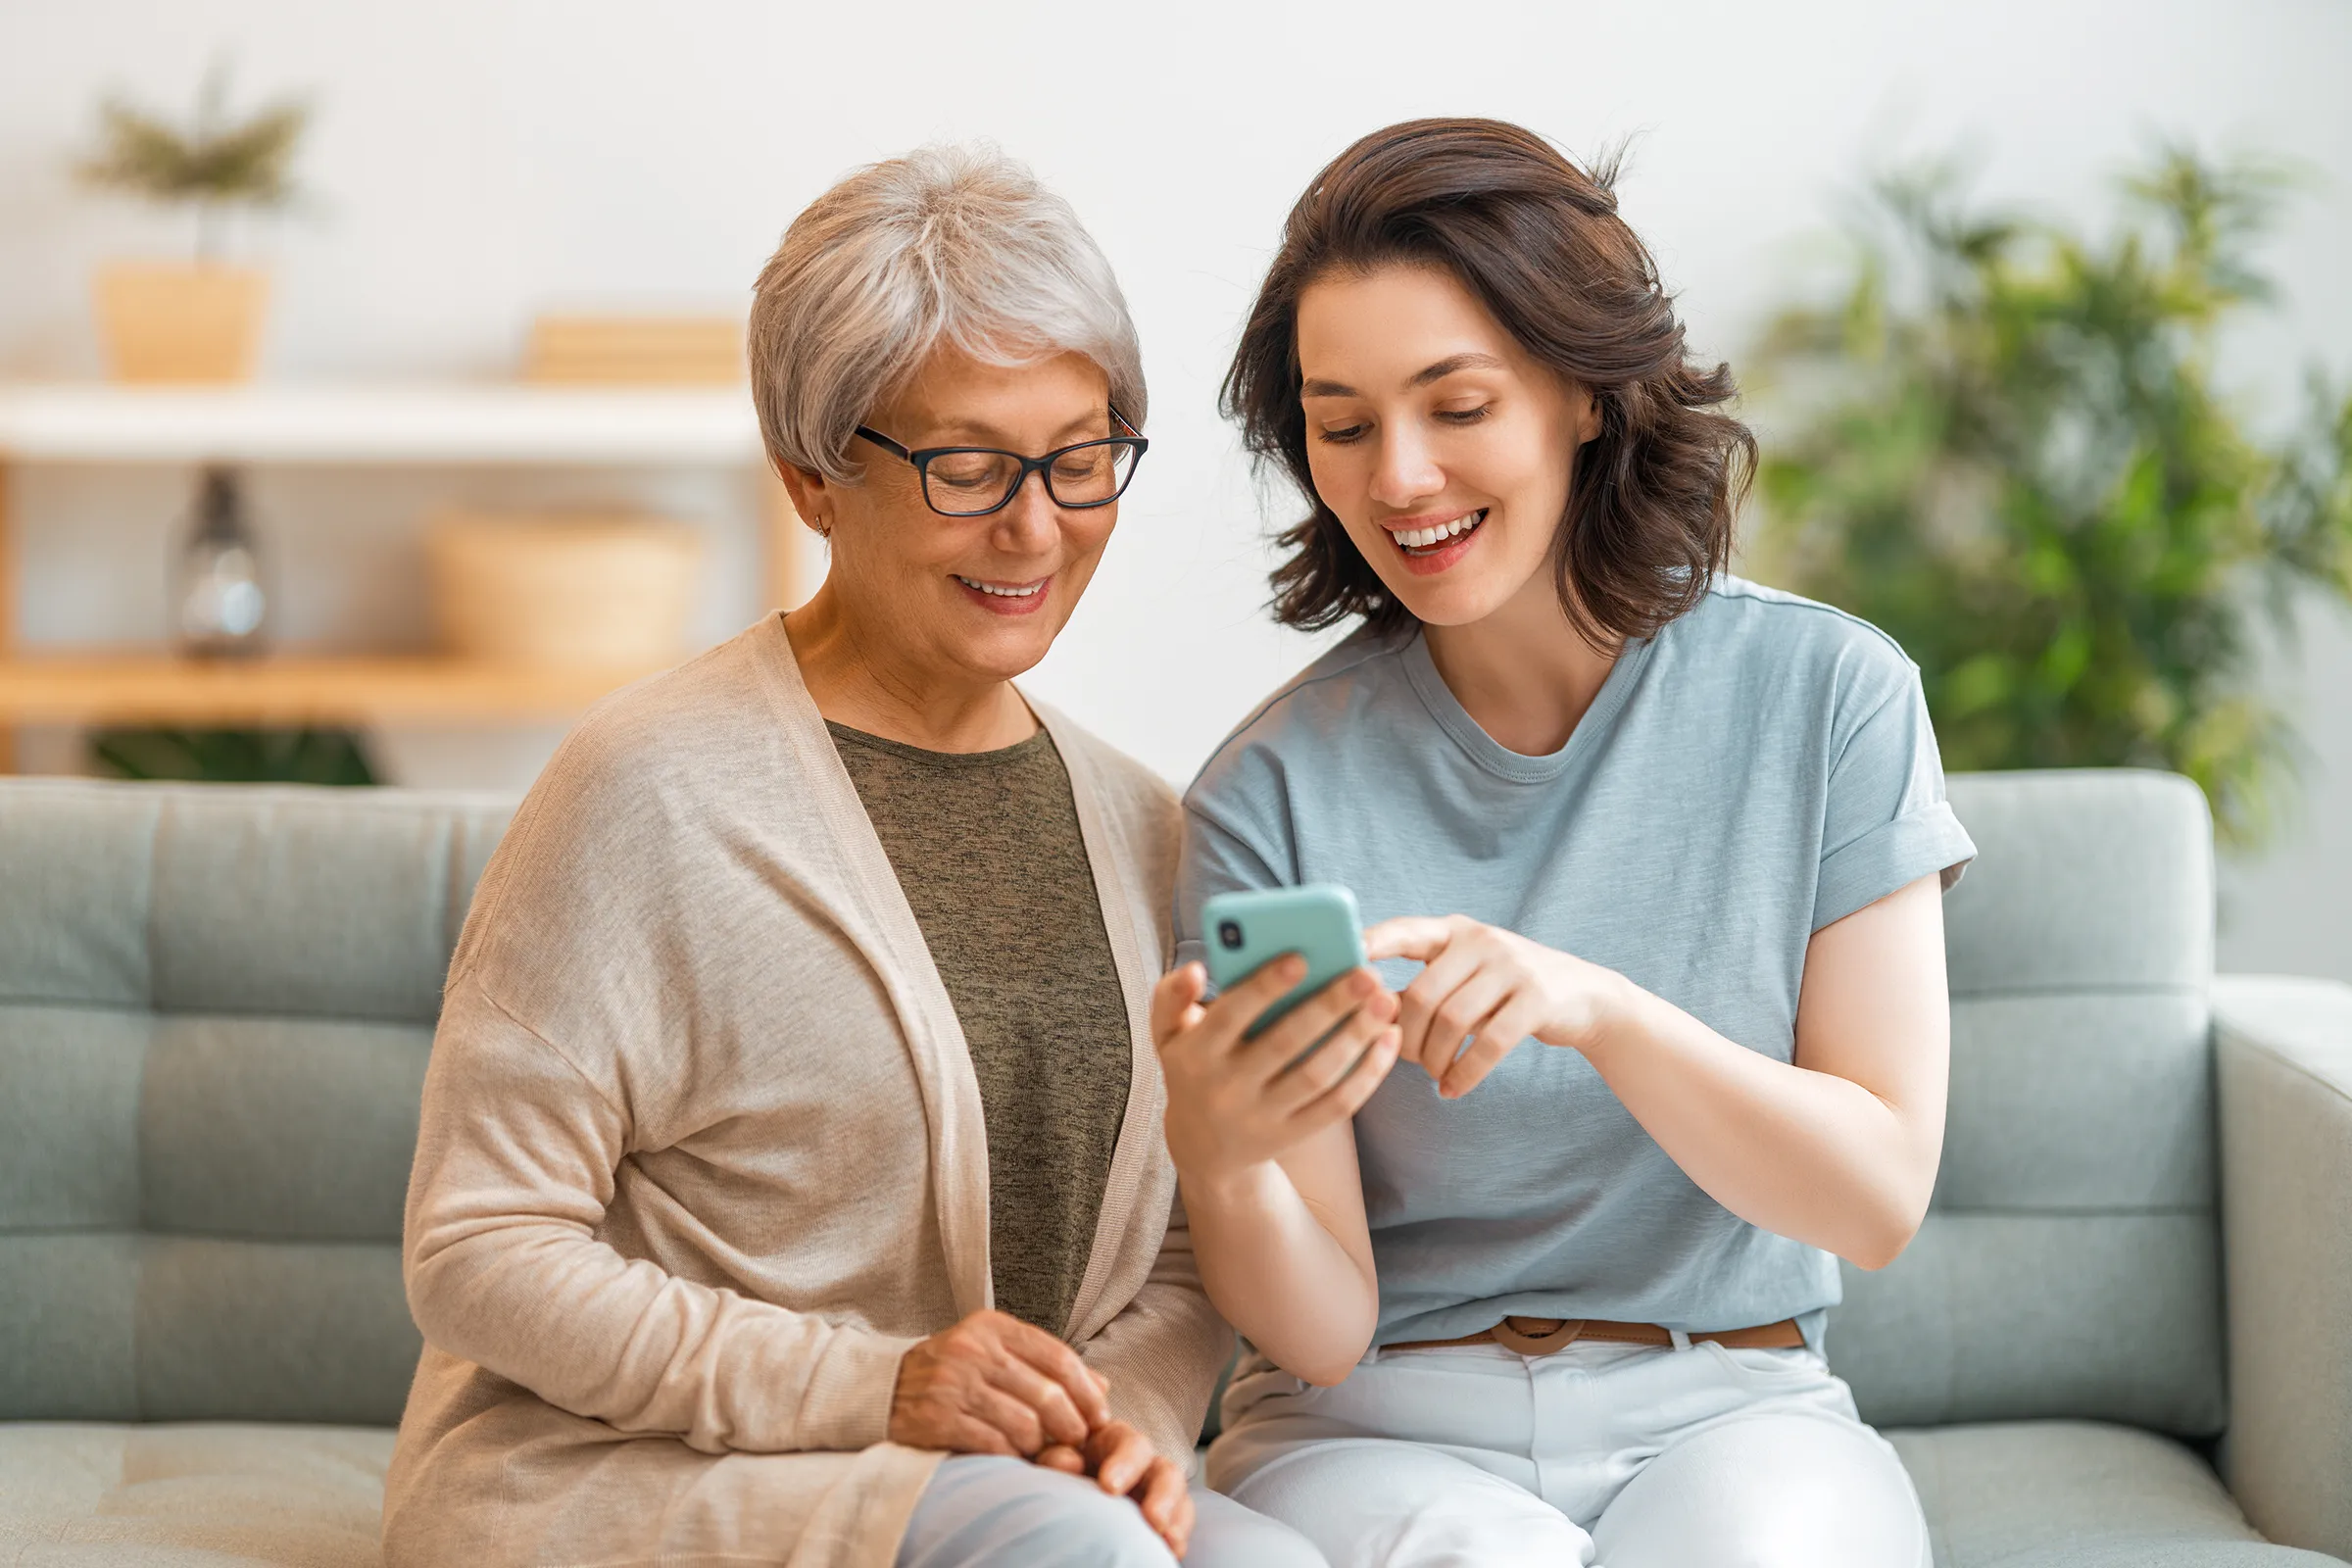 younger woman showing older woman something on her phone